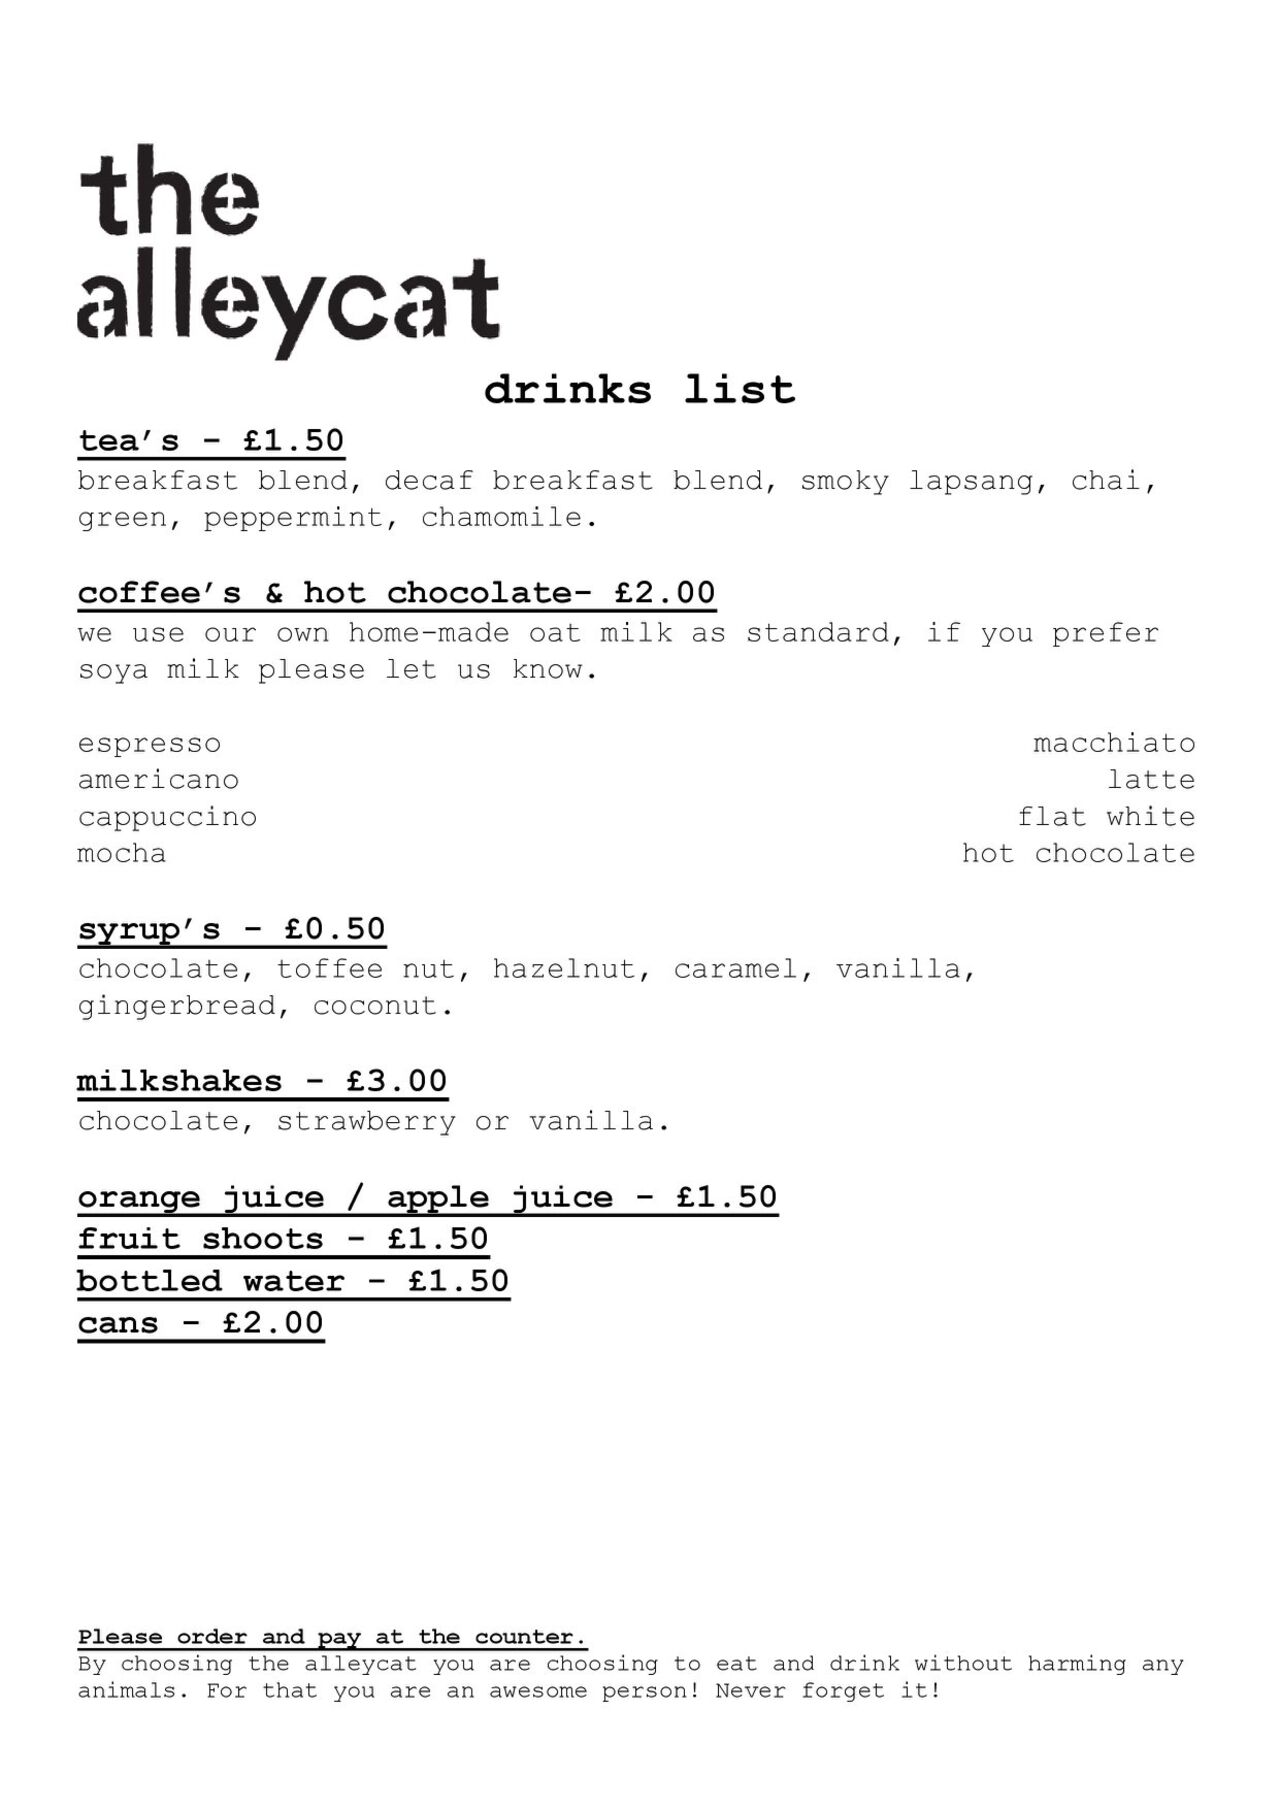 A photo of The Alleycat